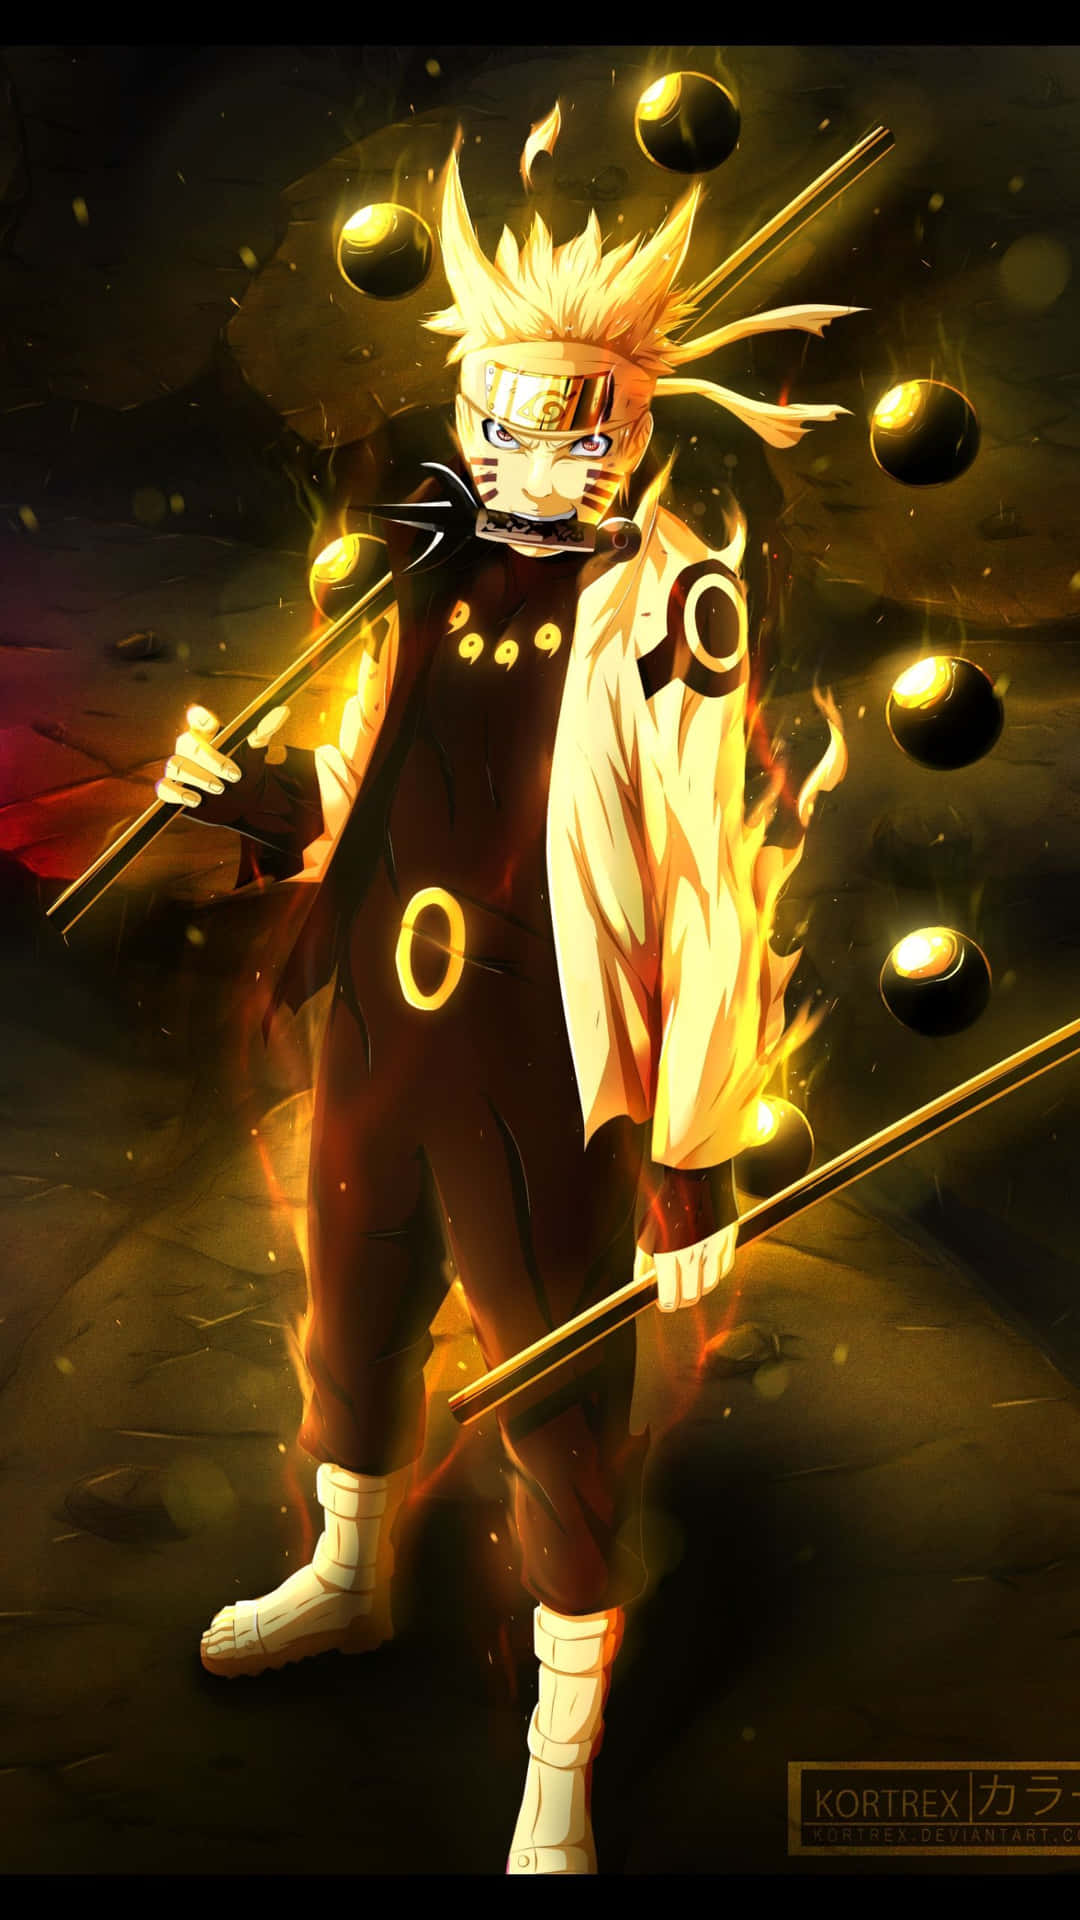 "Bringing Action-Packed Adventure on Your iPhone - Naruto Shippuden" Wallpaper